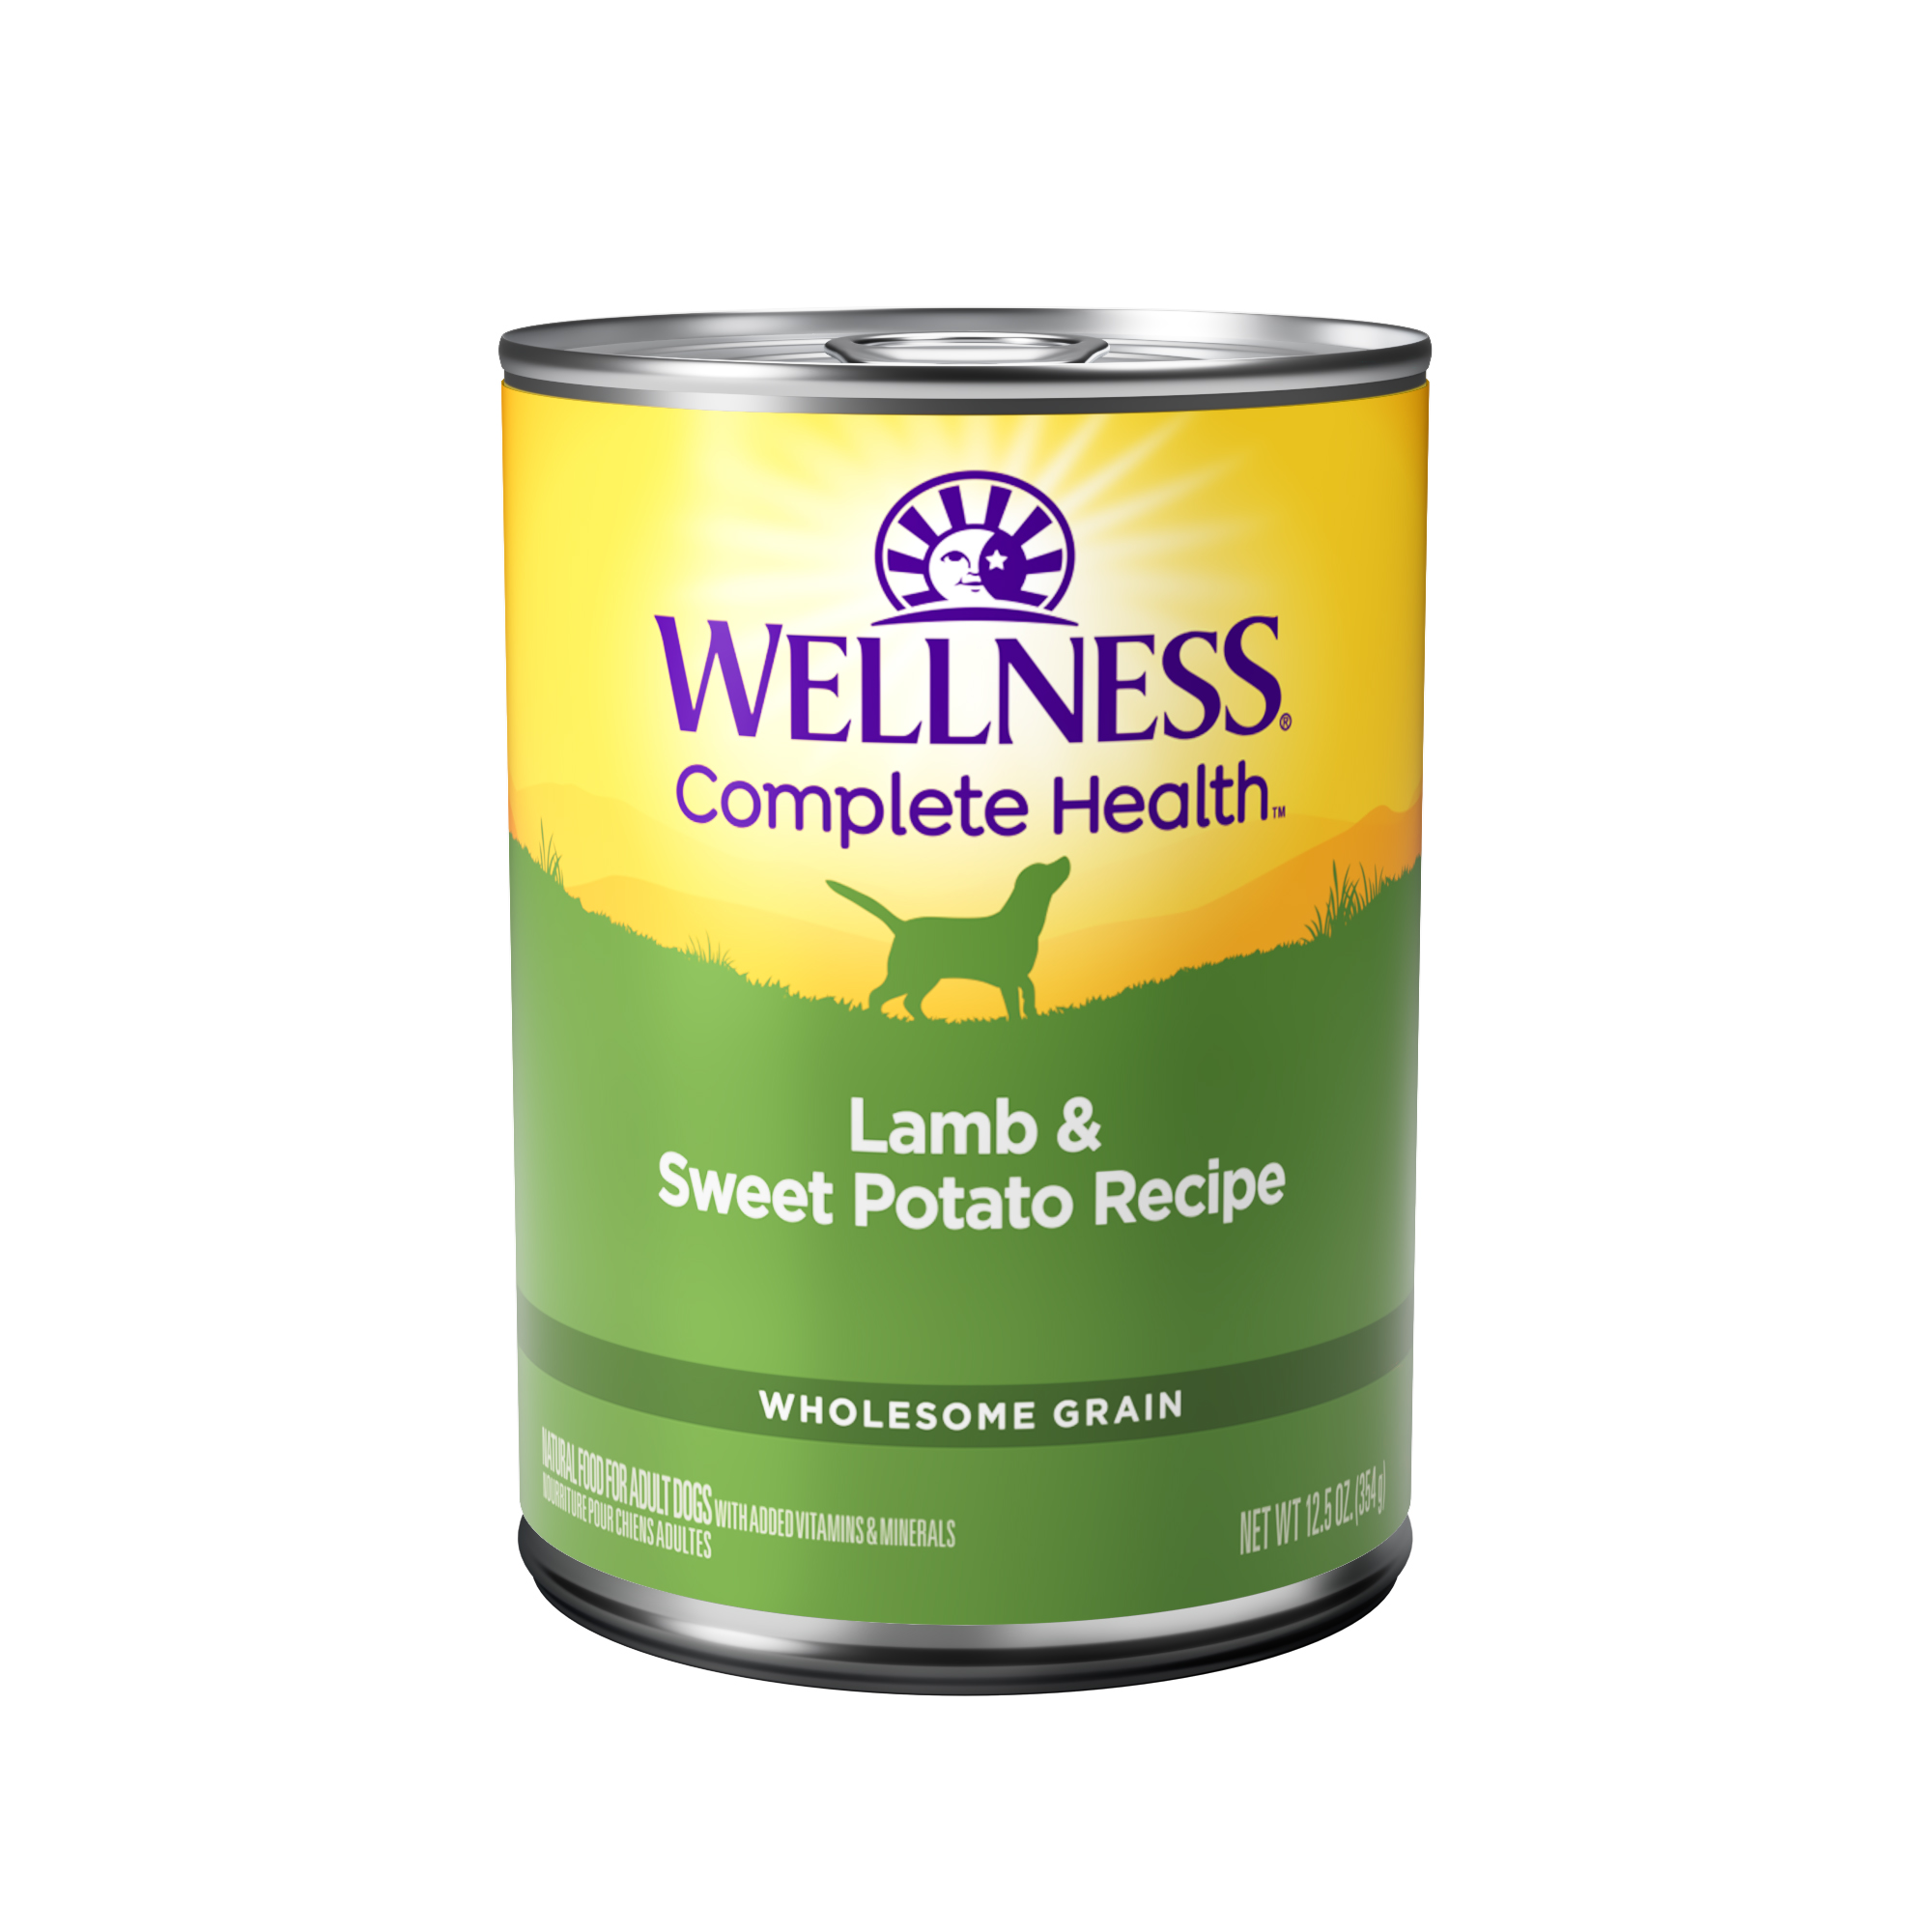 Wellness Complete Health Natural Wet Canned Dog Food, Lamb & Sweet Potato, 12.5-Ounce Can (Pack of 12) - image 1 of 7